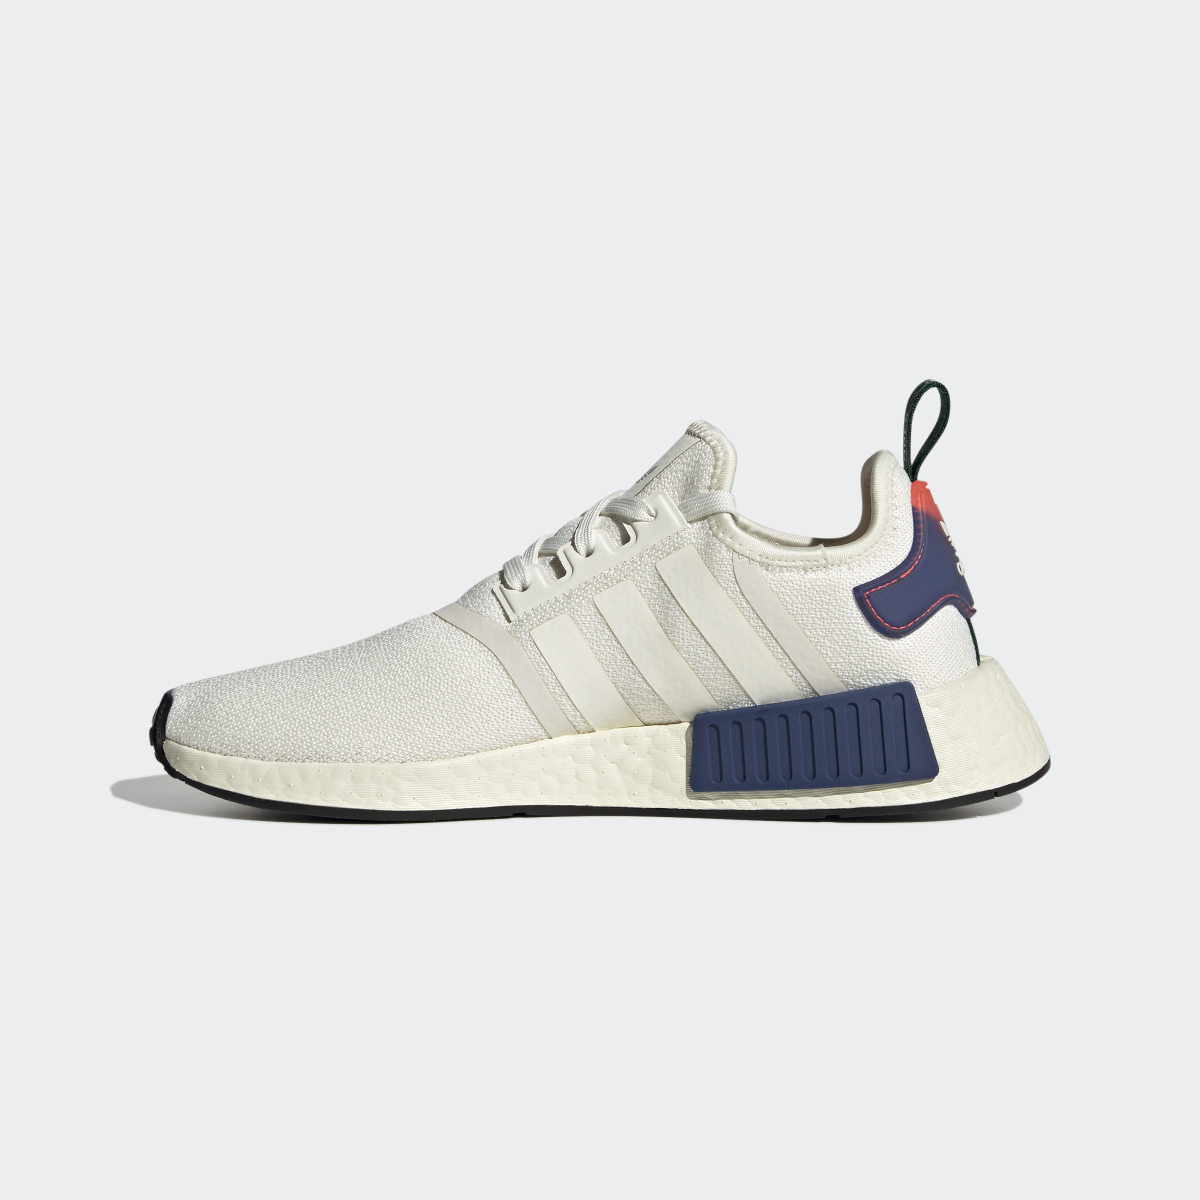 Adidas NMD_R1 Shoes. 7